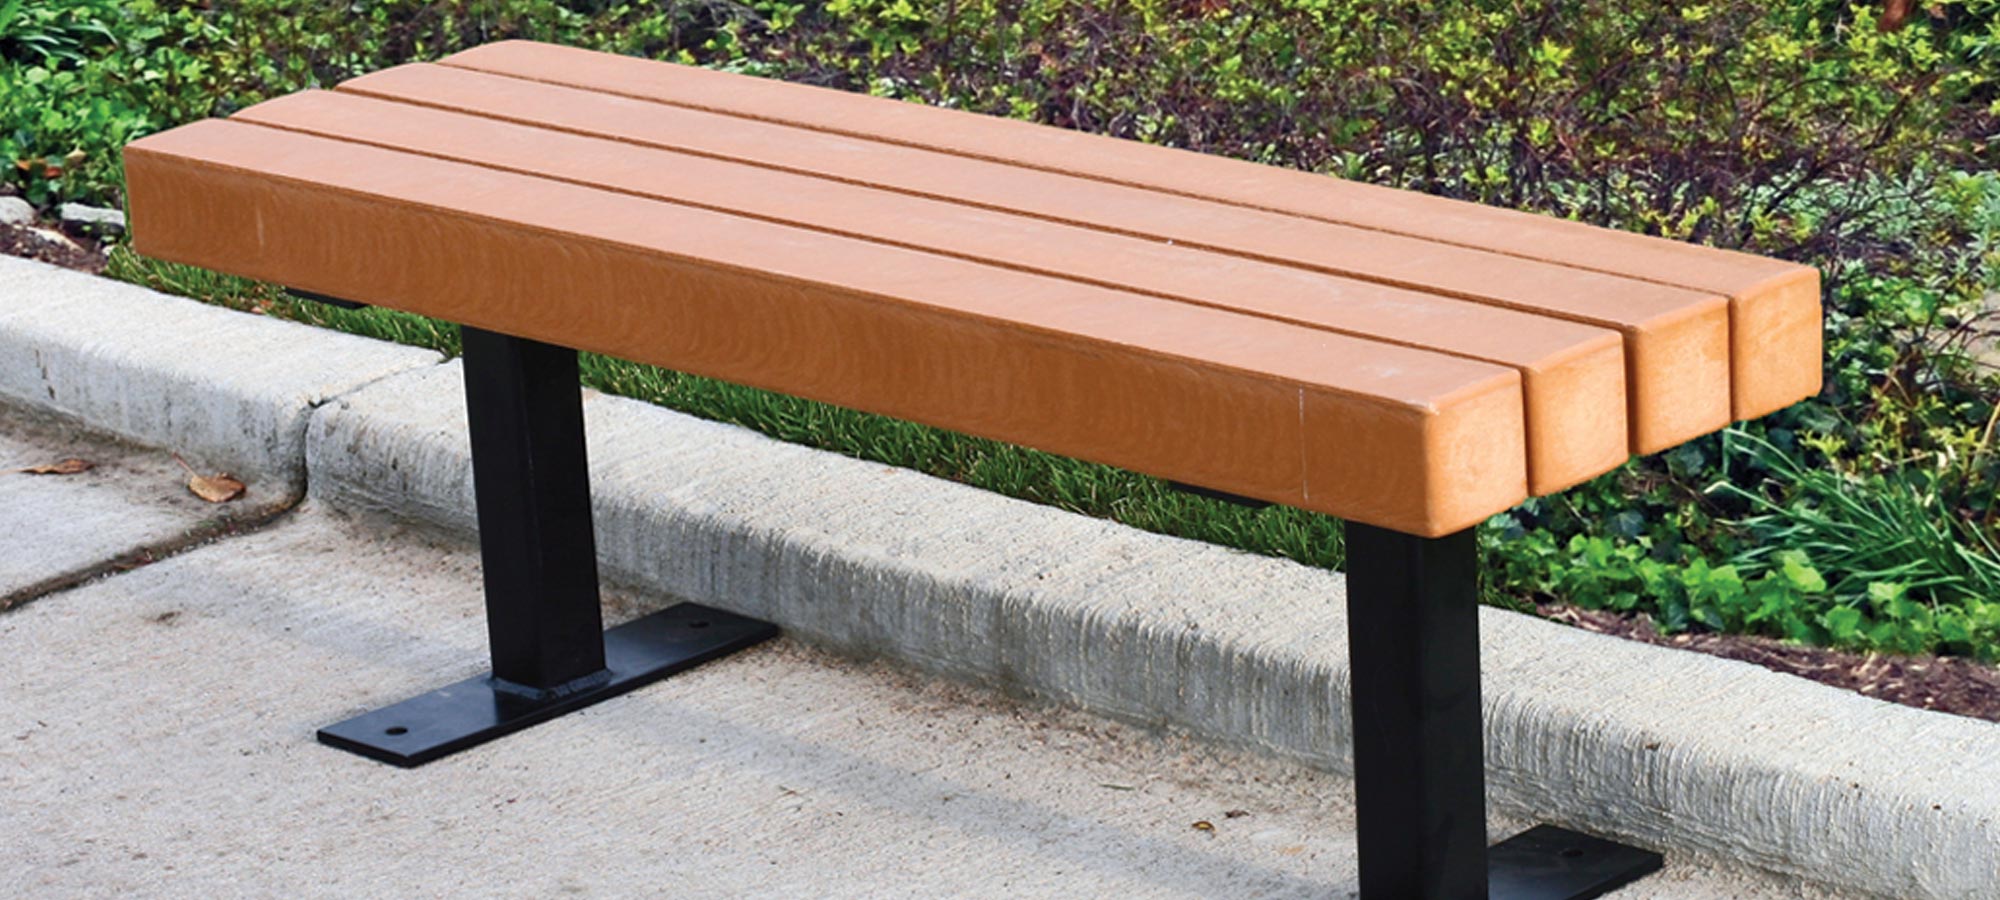 Trailside Outdoor Bench - Frog Furnishings